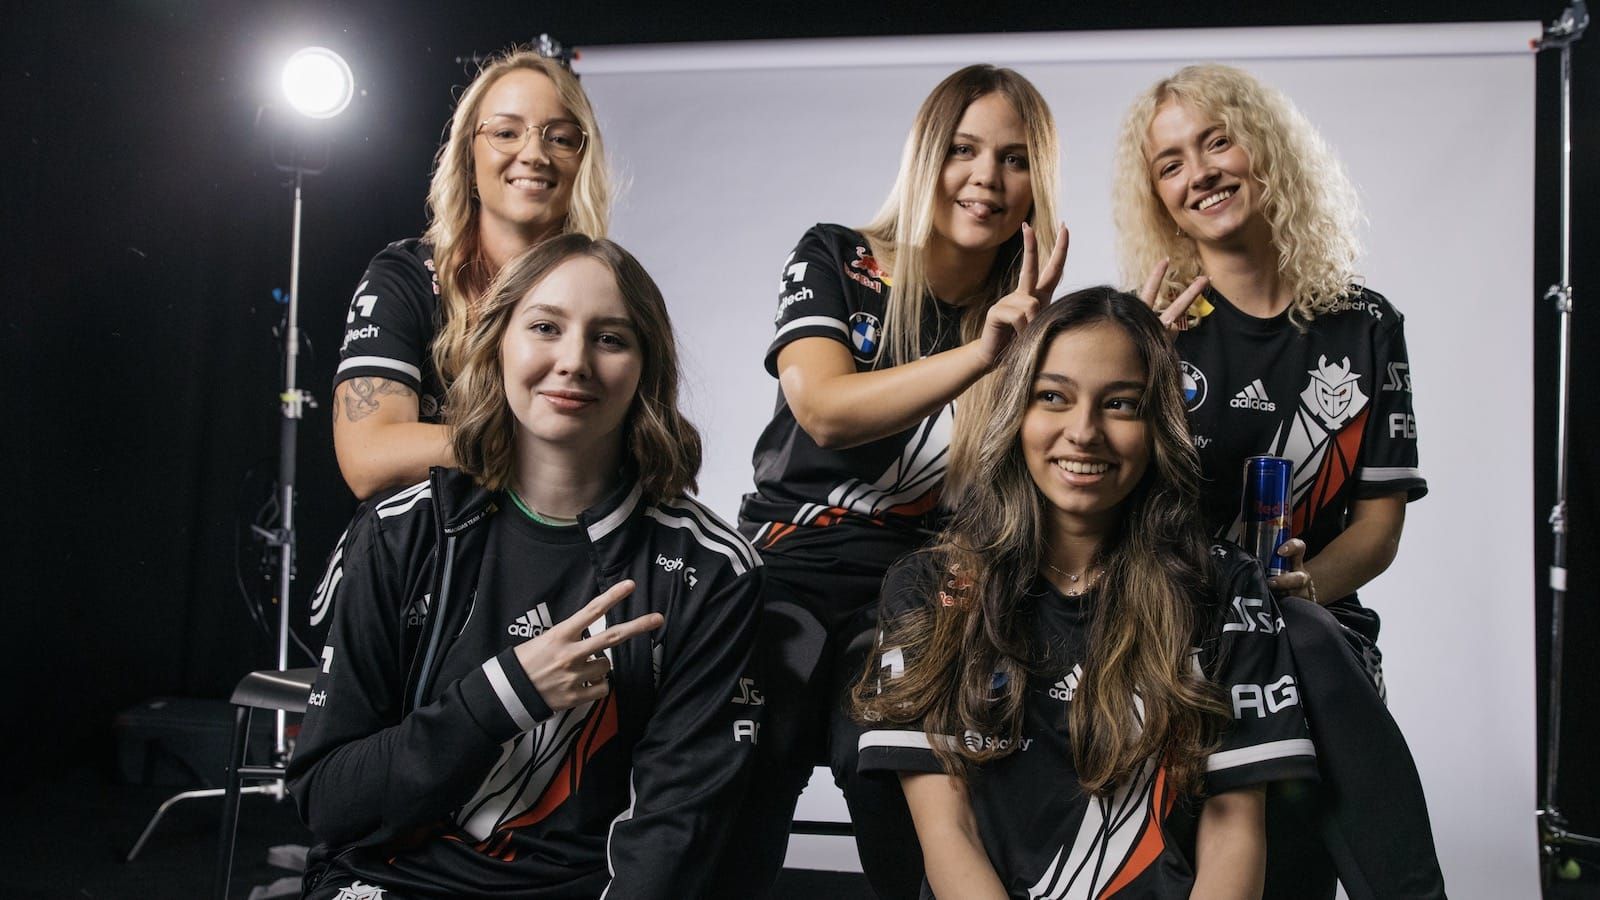 VALORANT: VCT Game Changers and best female players in 2022 – Stryda